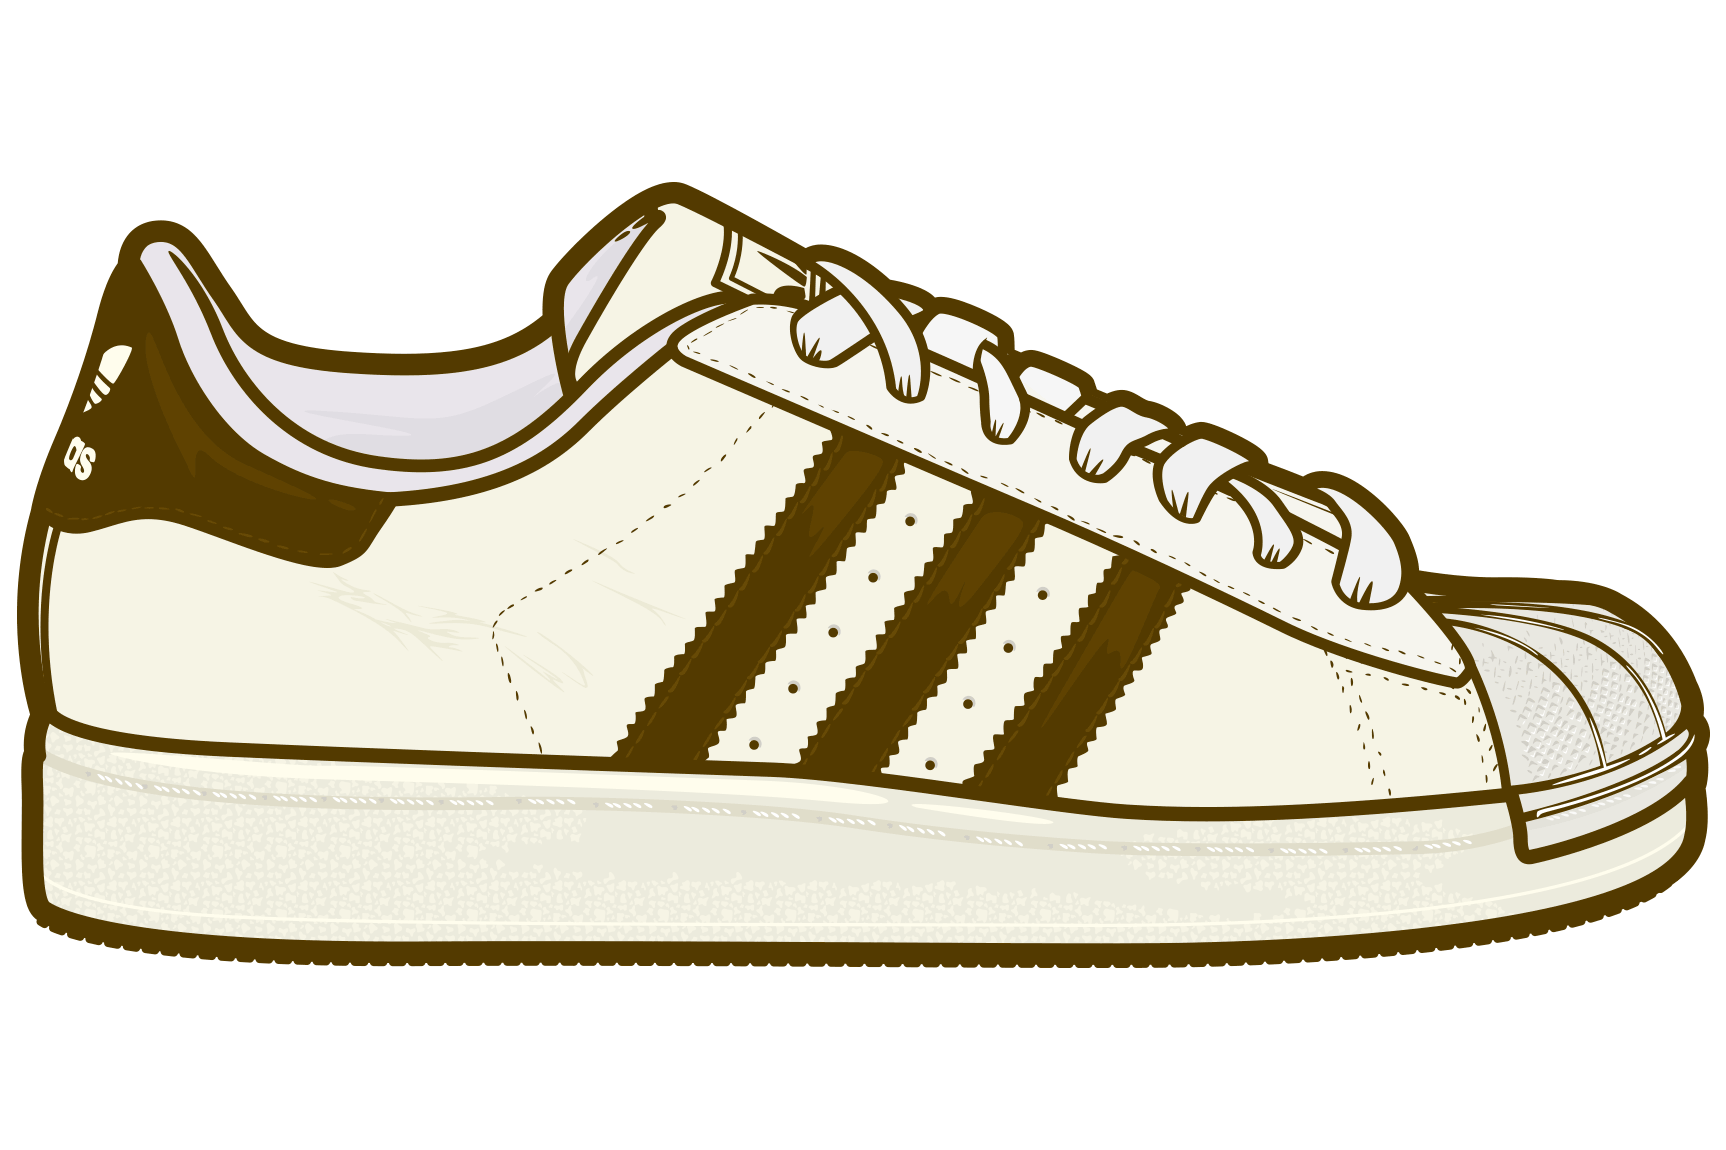 Adidas Drawing Shoes at Explore collection of